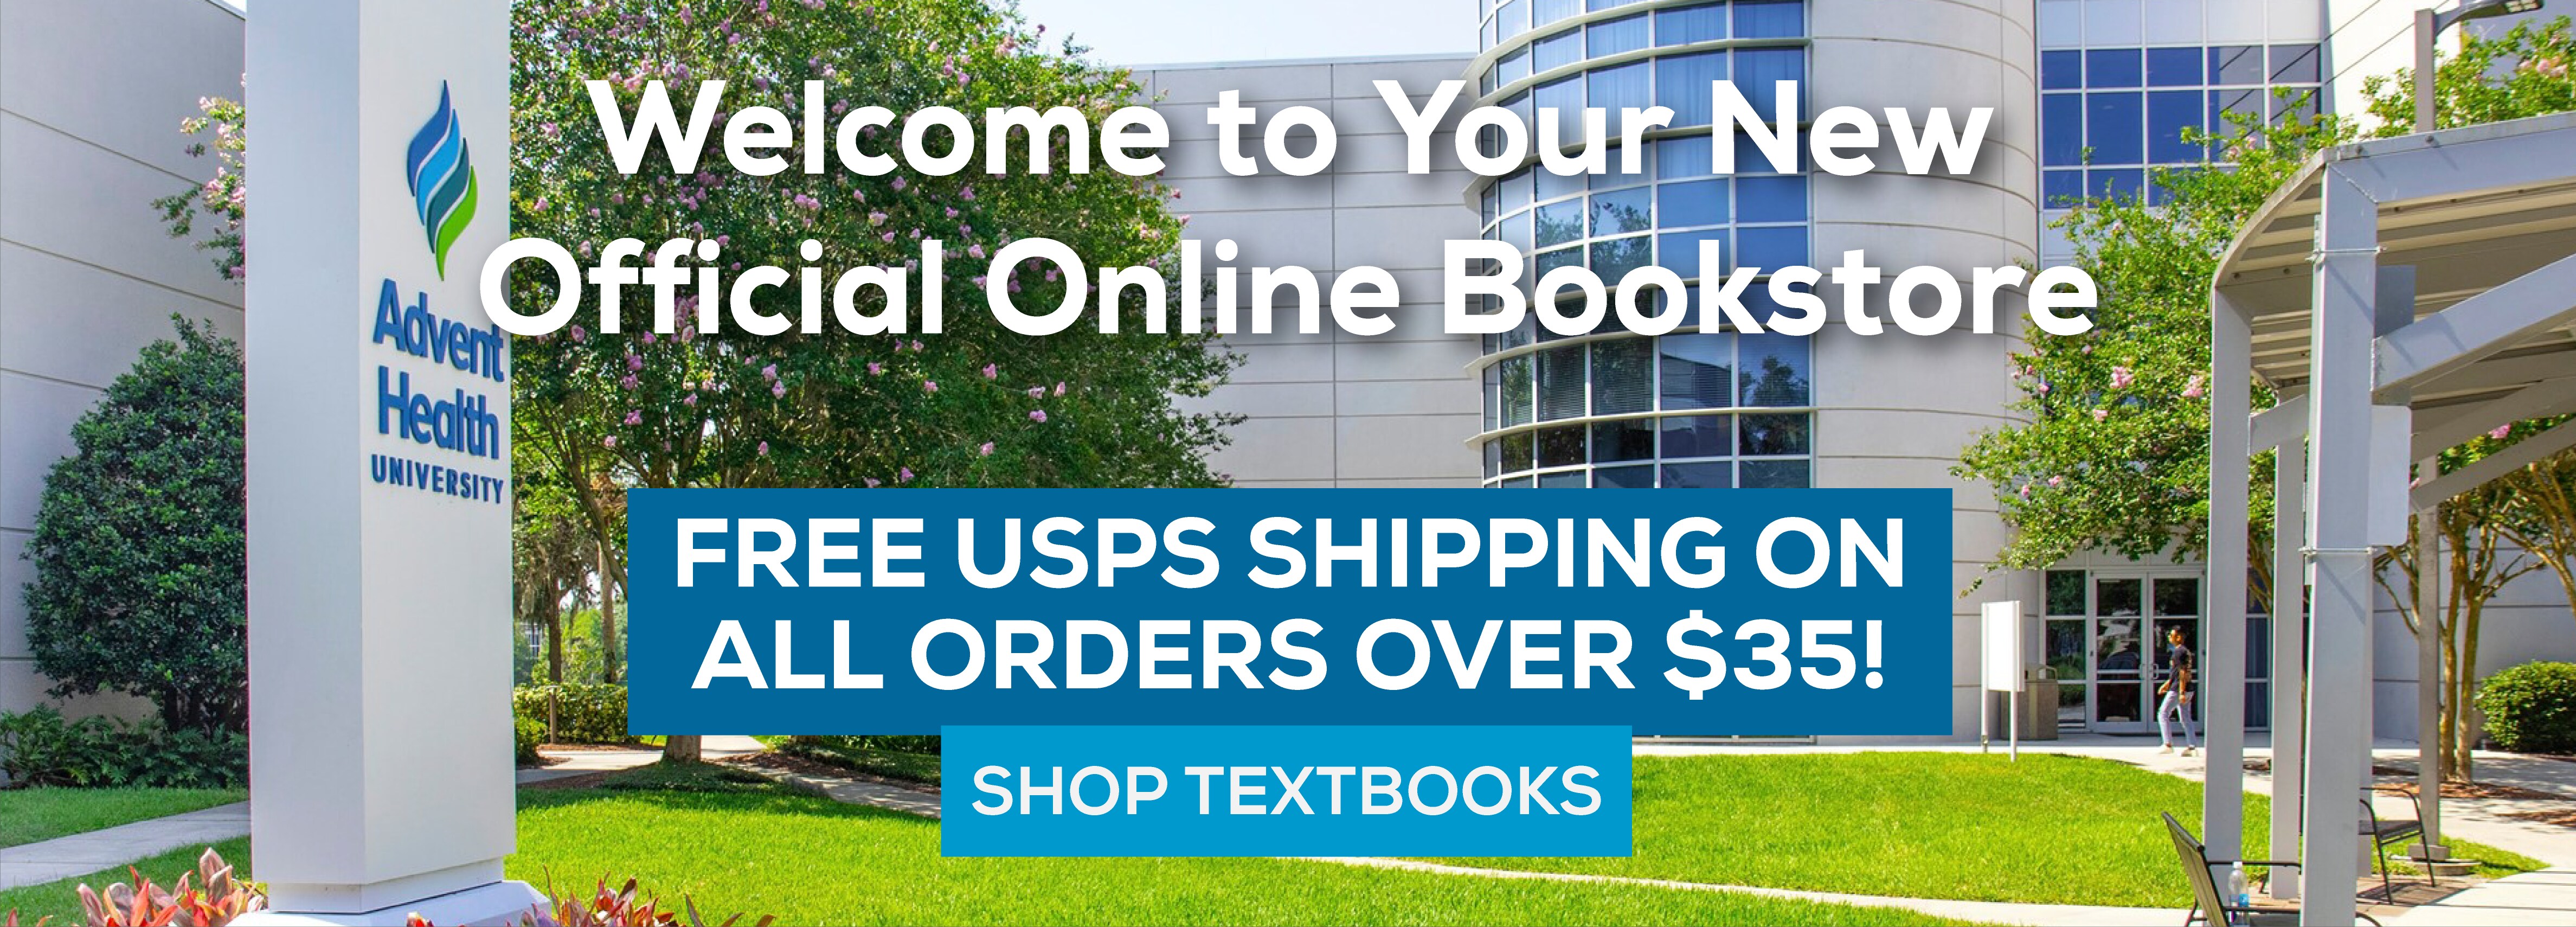 Welcome to your new official online bookstore. Free USPS shipping on all orders over $35! Shop Textbooks